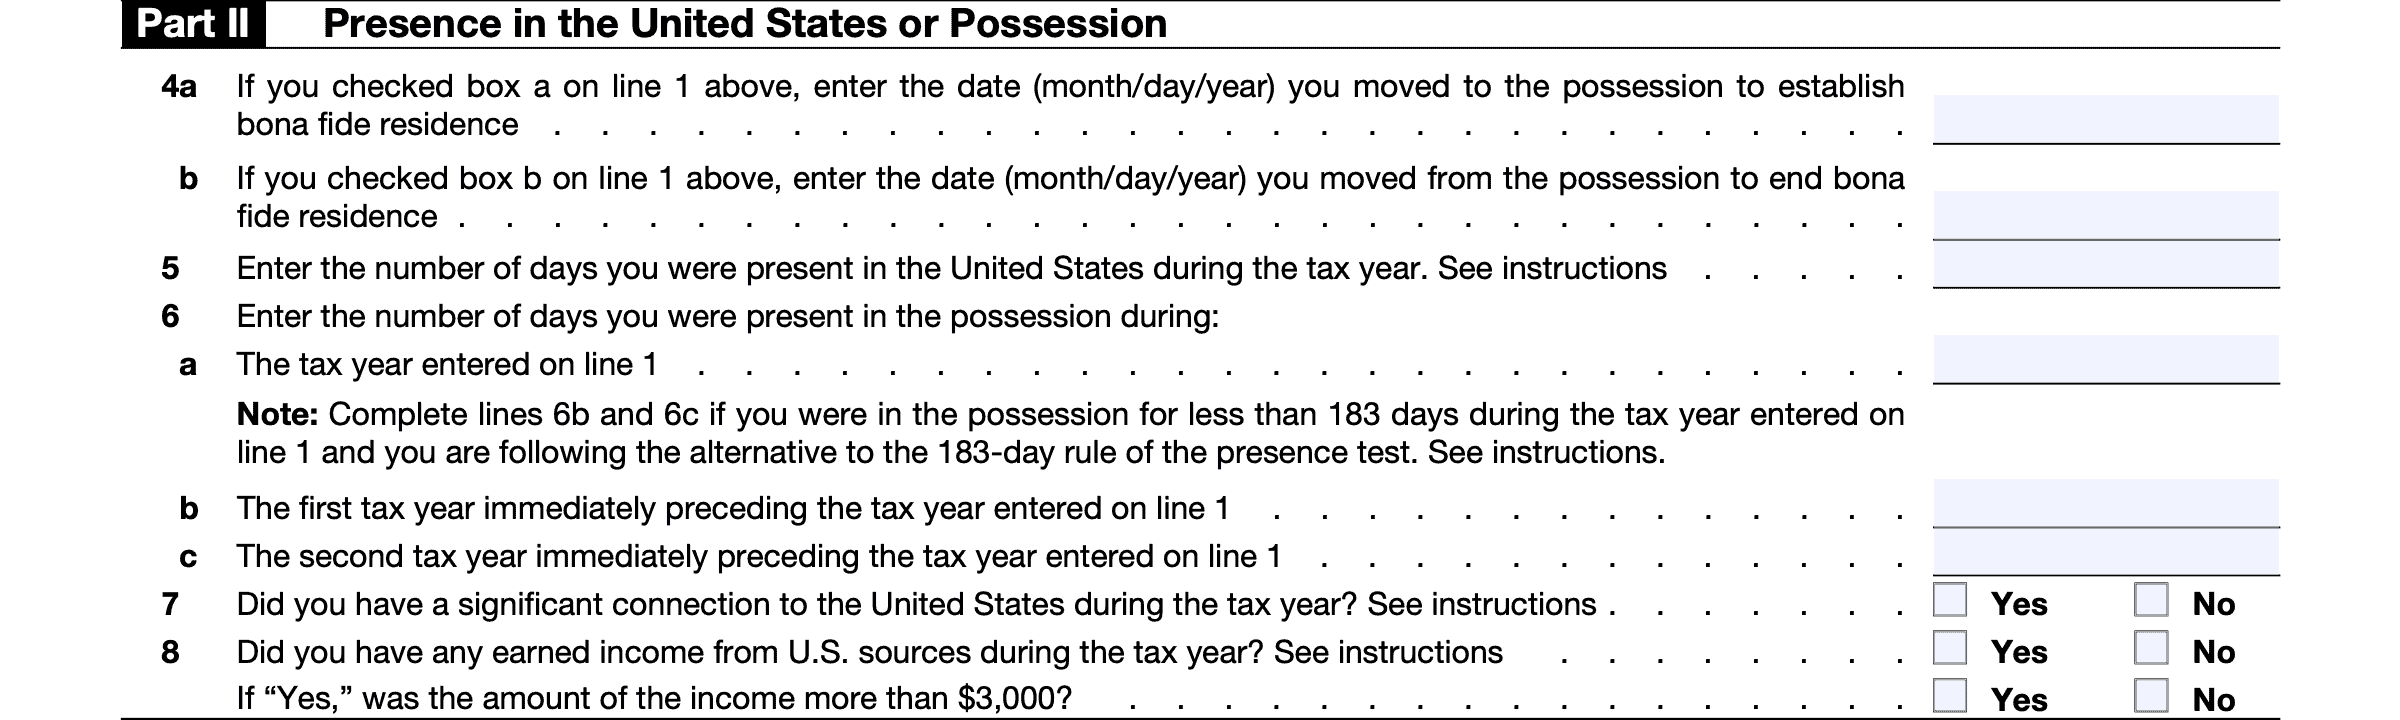 IRS Form 8898 part II: presence in the United States or possession